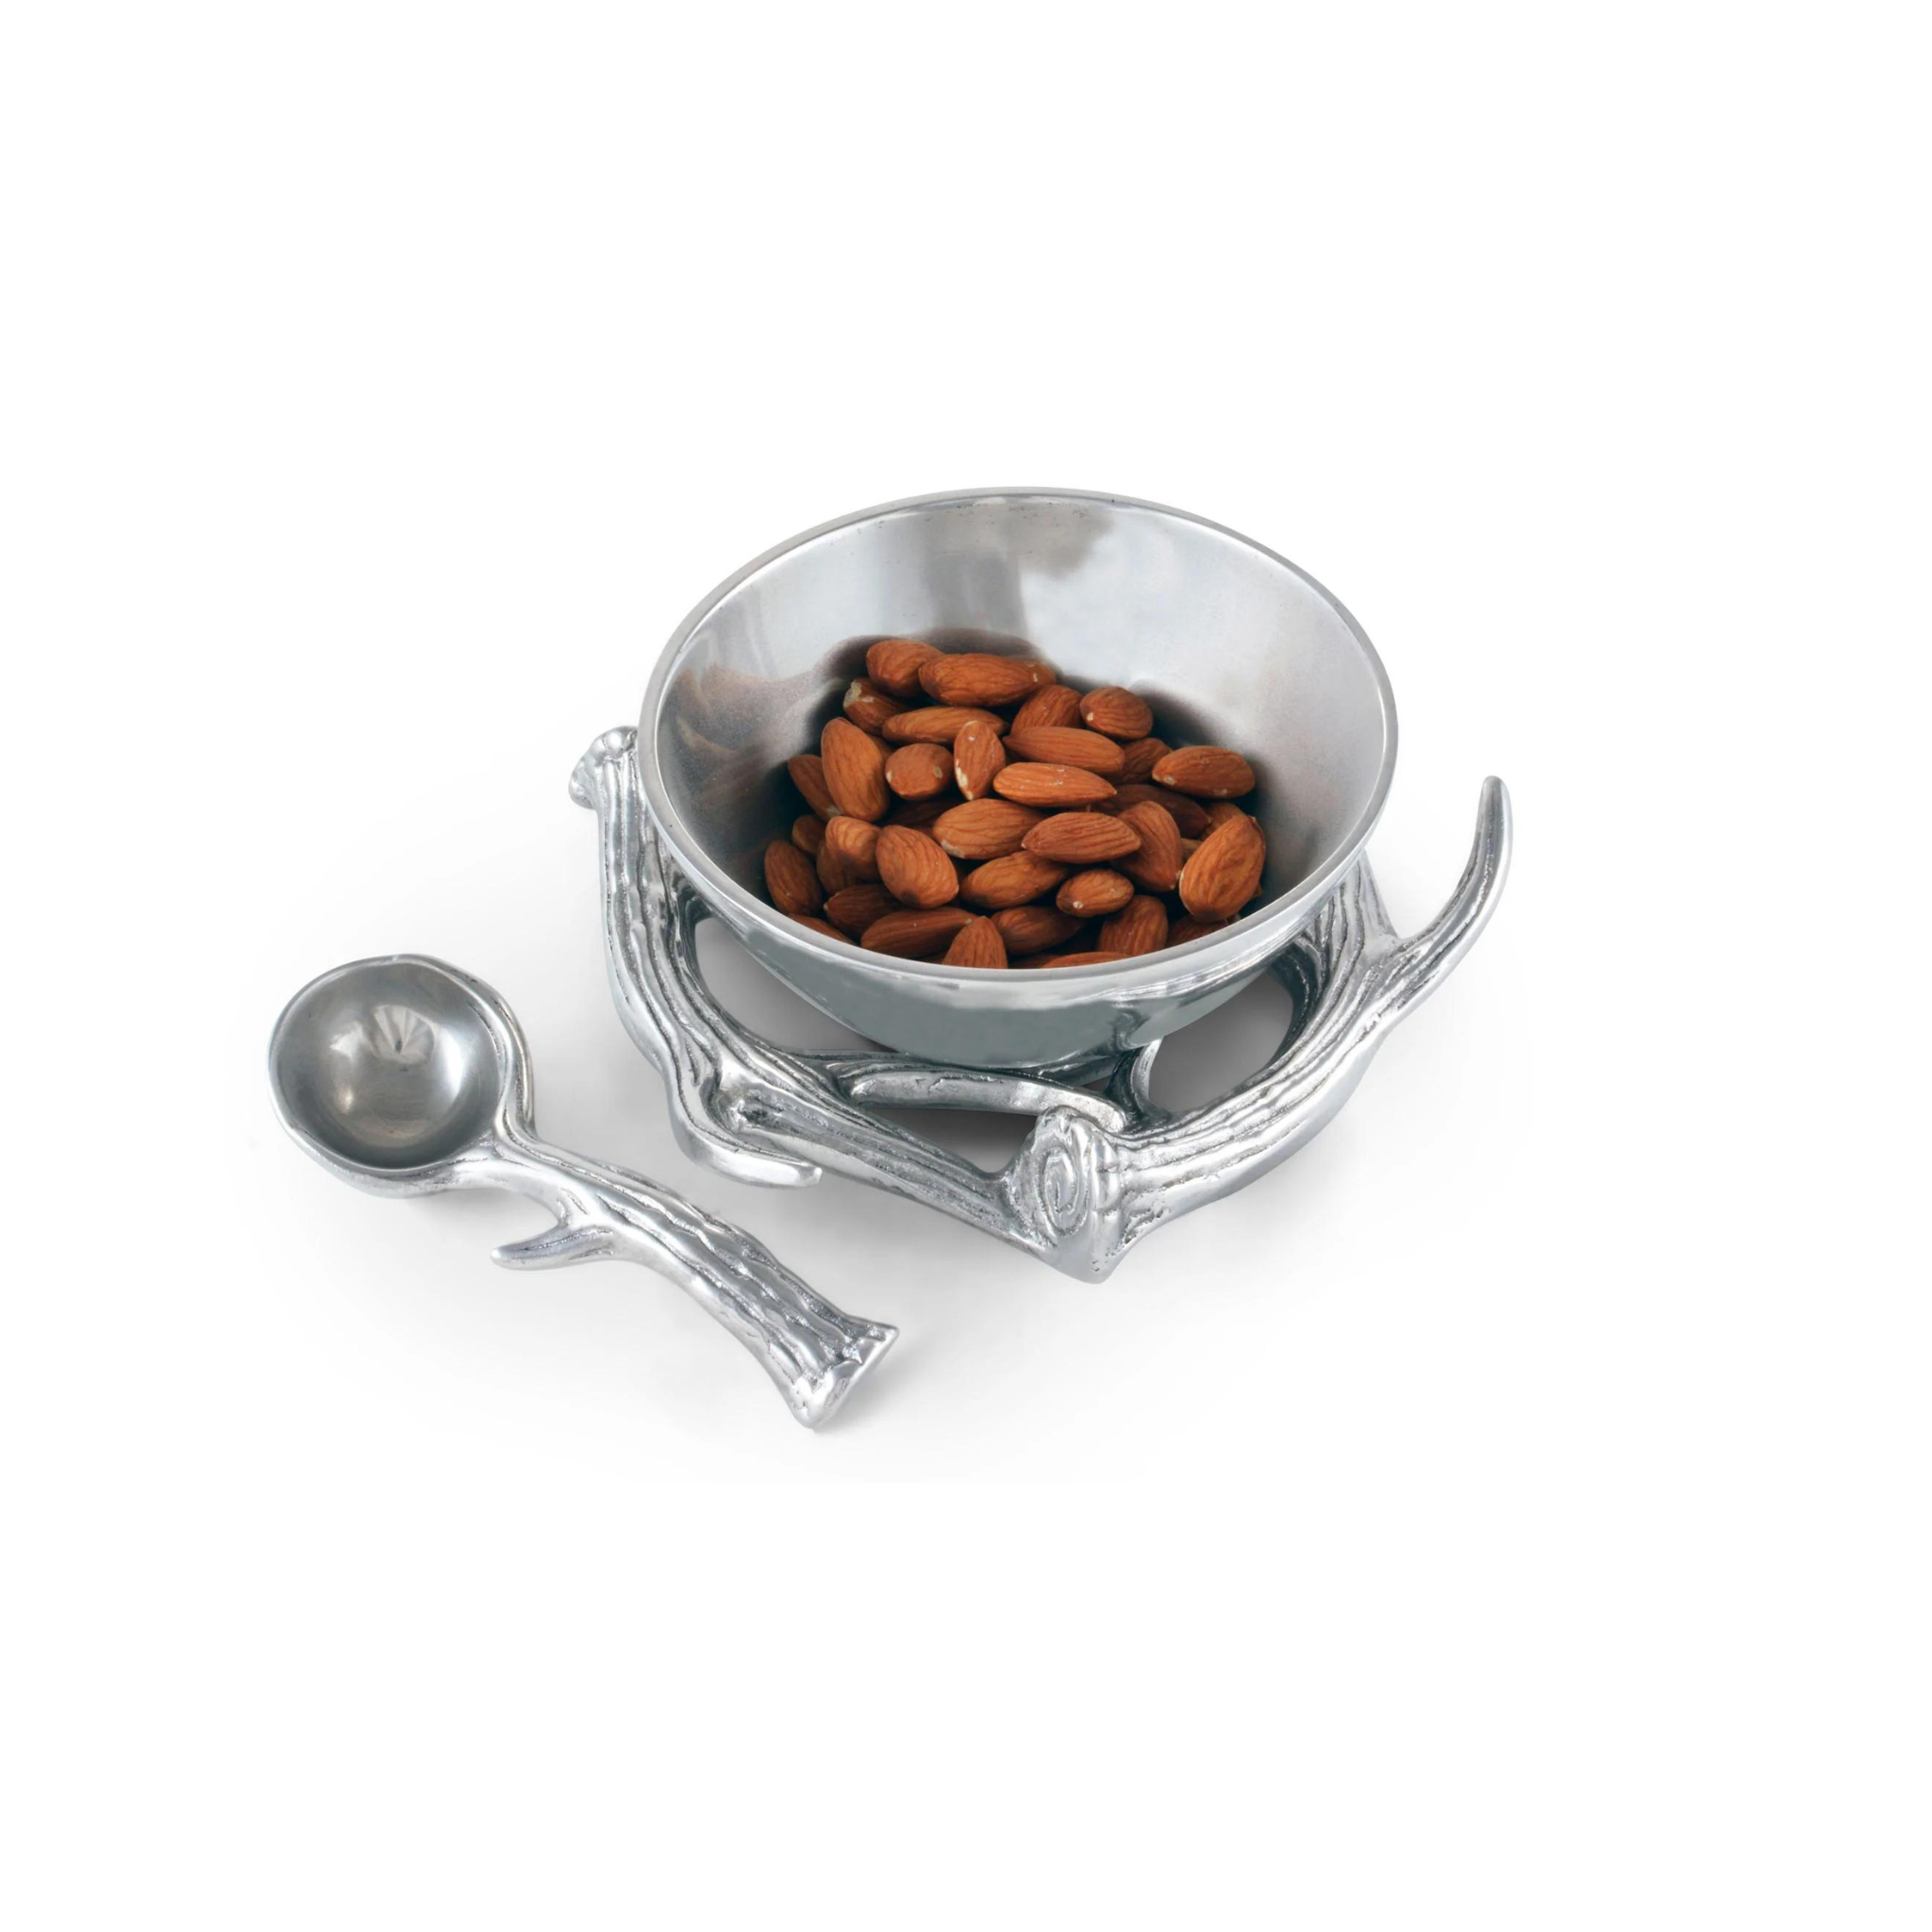 an aluminum serving bowl with antler base and spoon filled with nuts